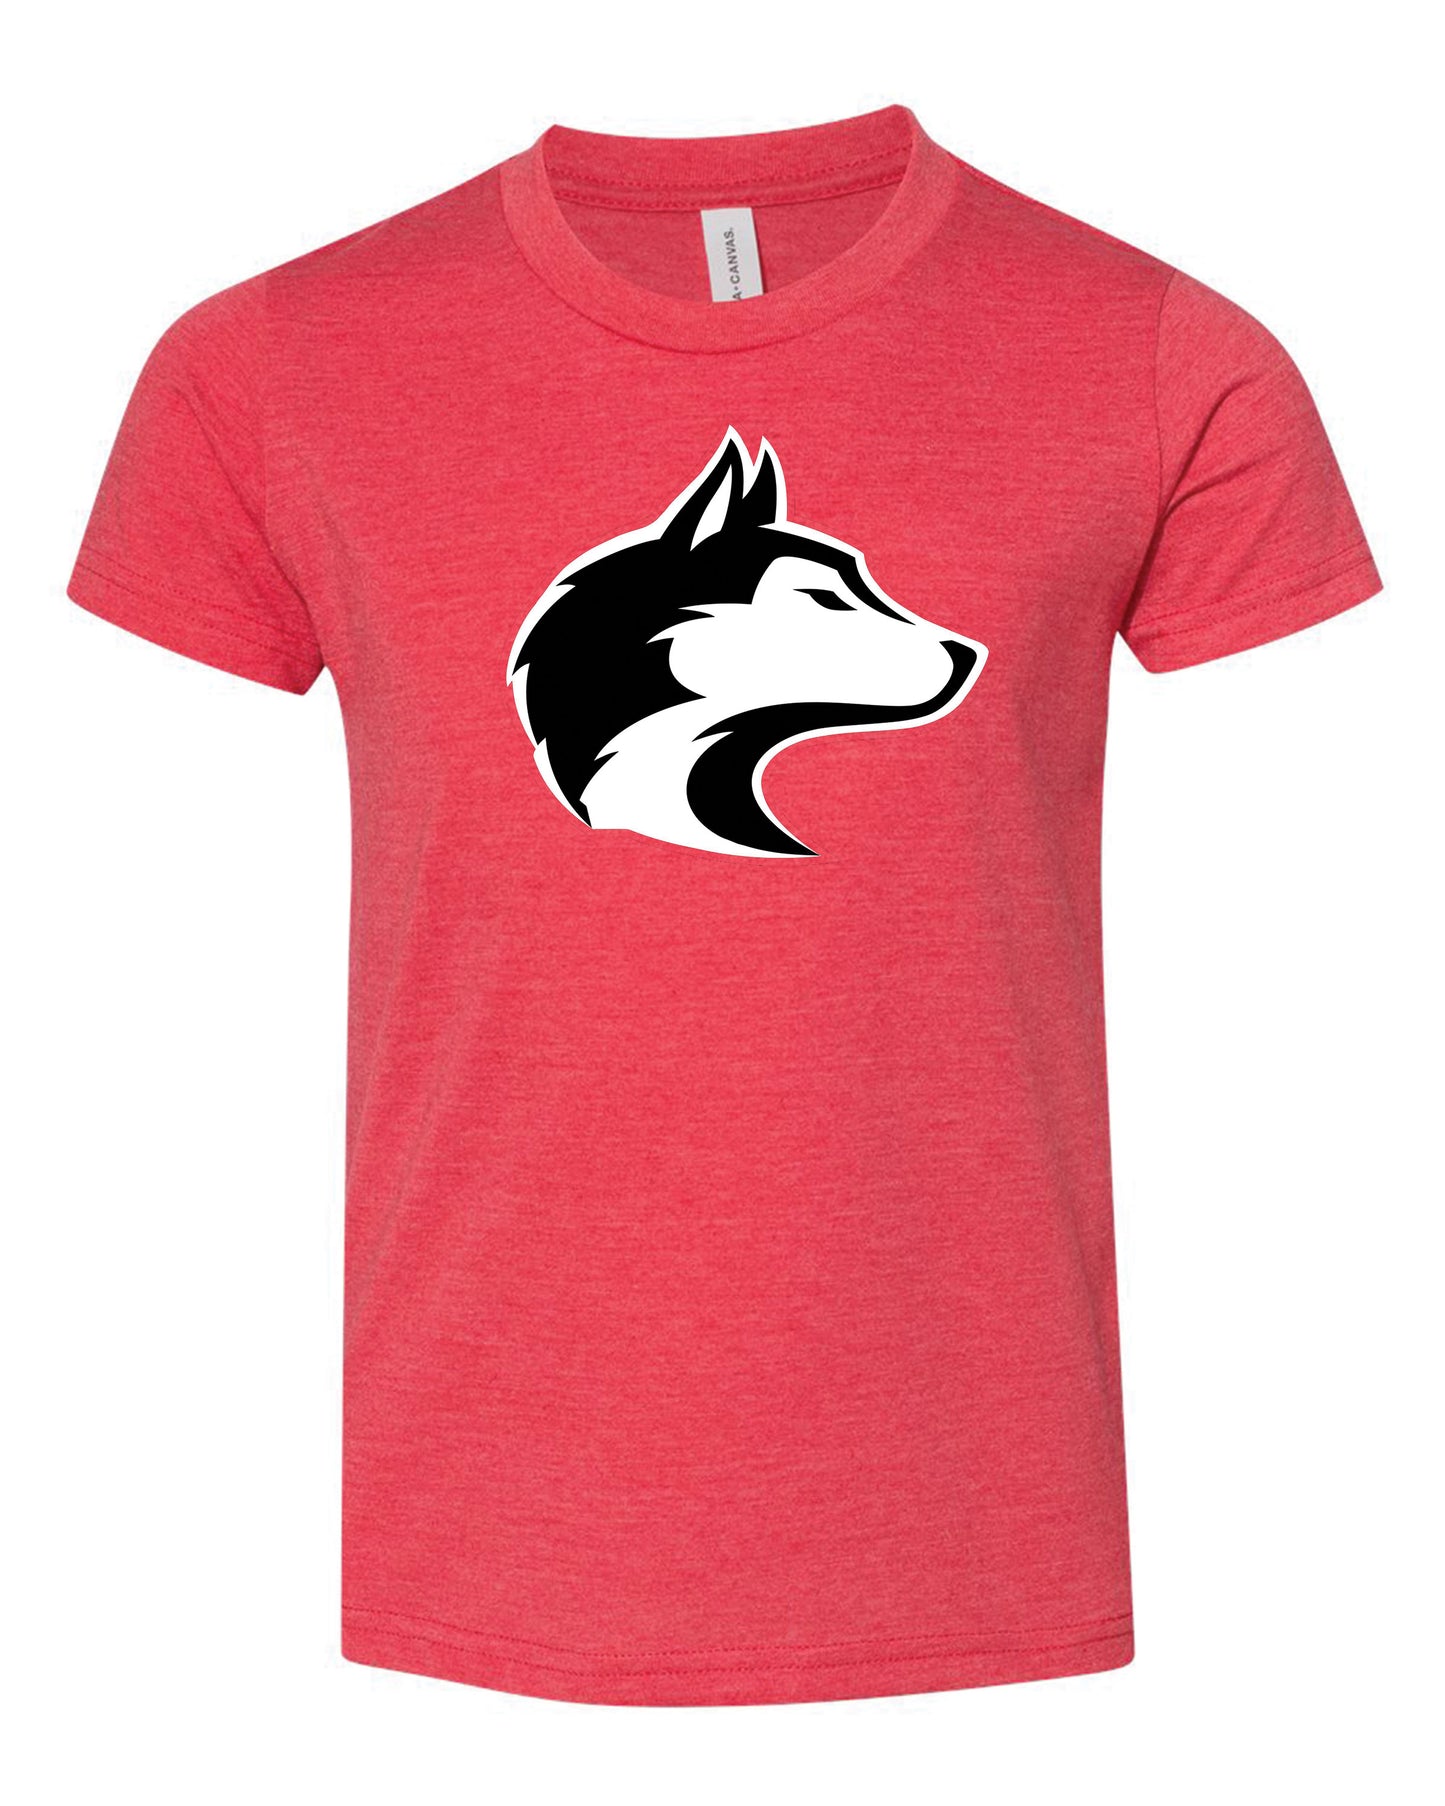 Husky Fast | Tee | Kids-Sister Shirts-Sister Shirts, Cute & Custom Tees for Mama & Littles in Trussville, Alabama.